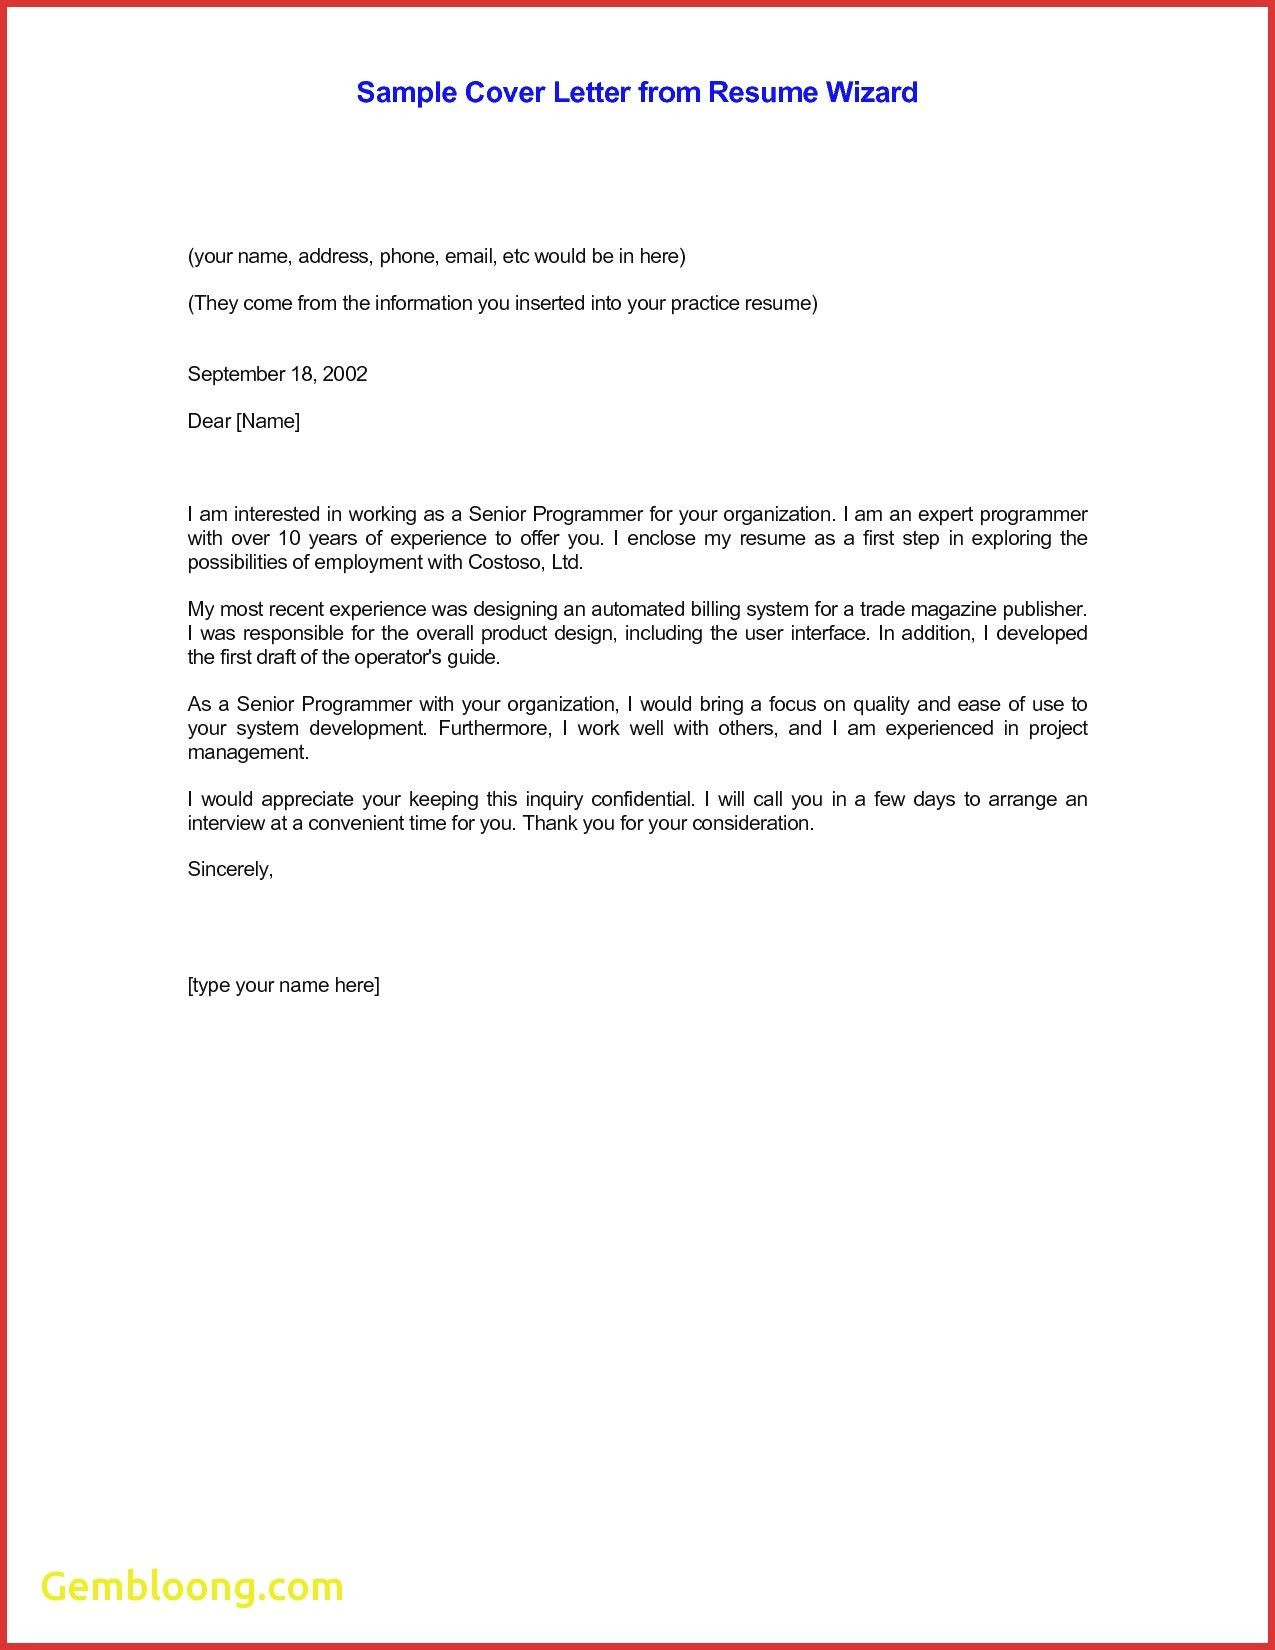 Email with Resume and Cover Letter Sample Email Cv Cover Letter Template – Resume format Cover Letter for …